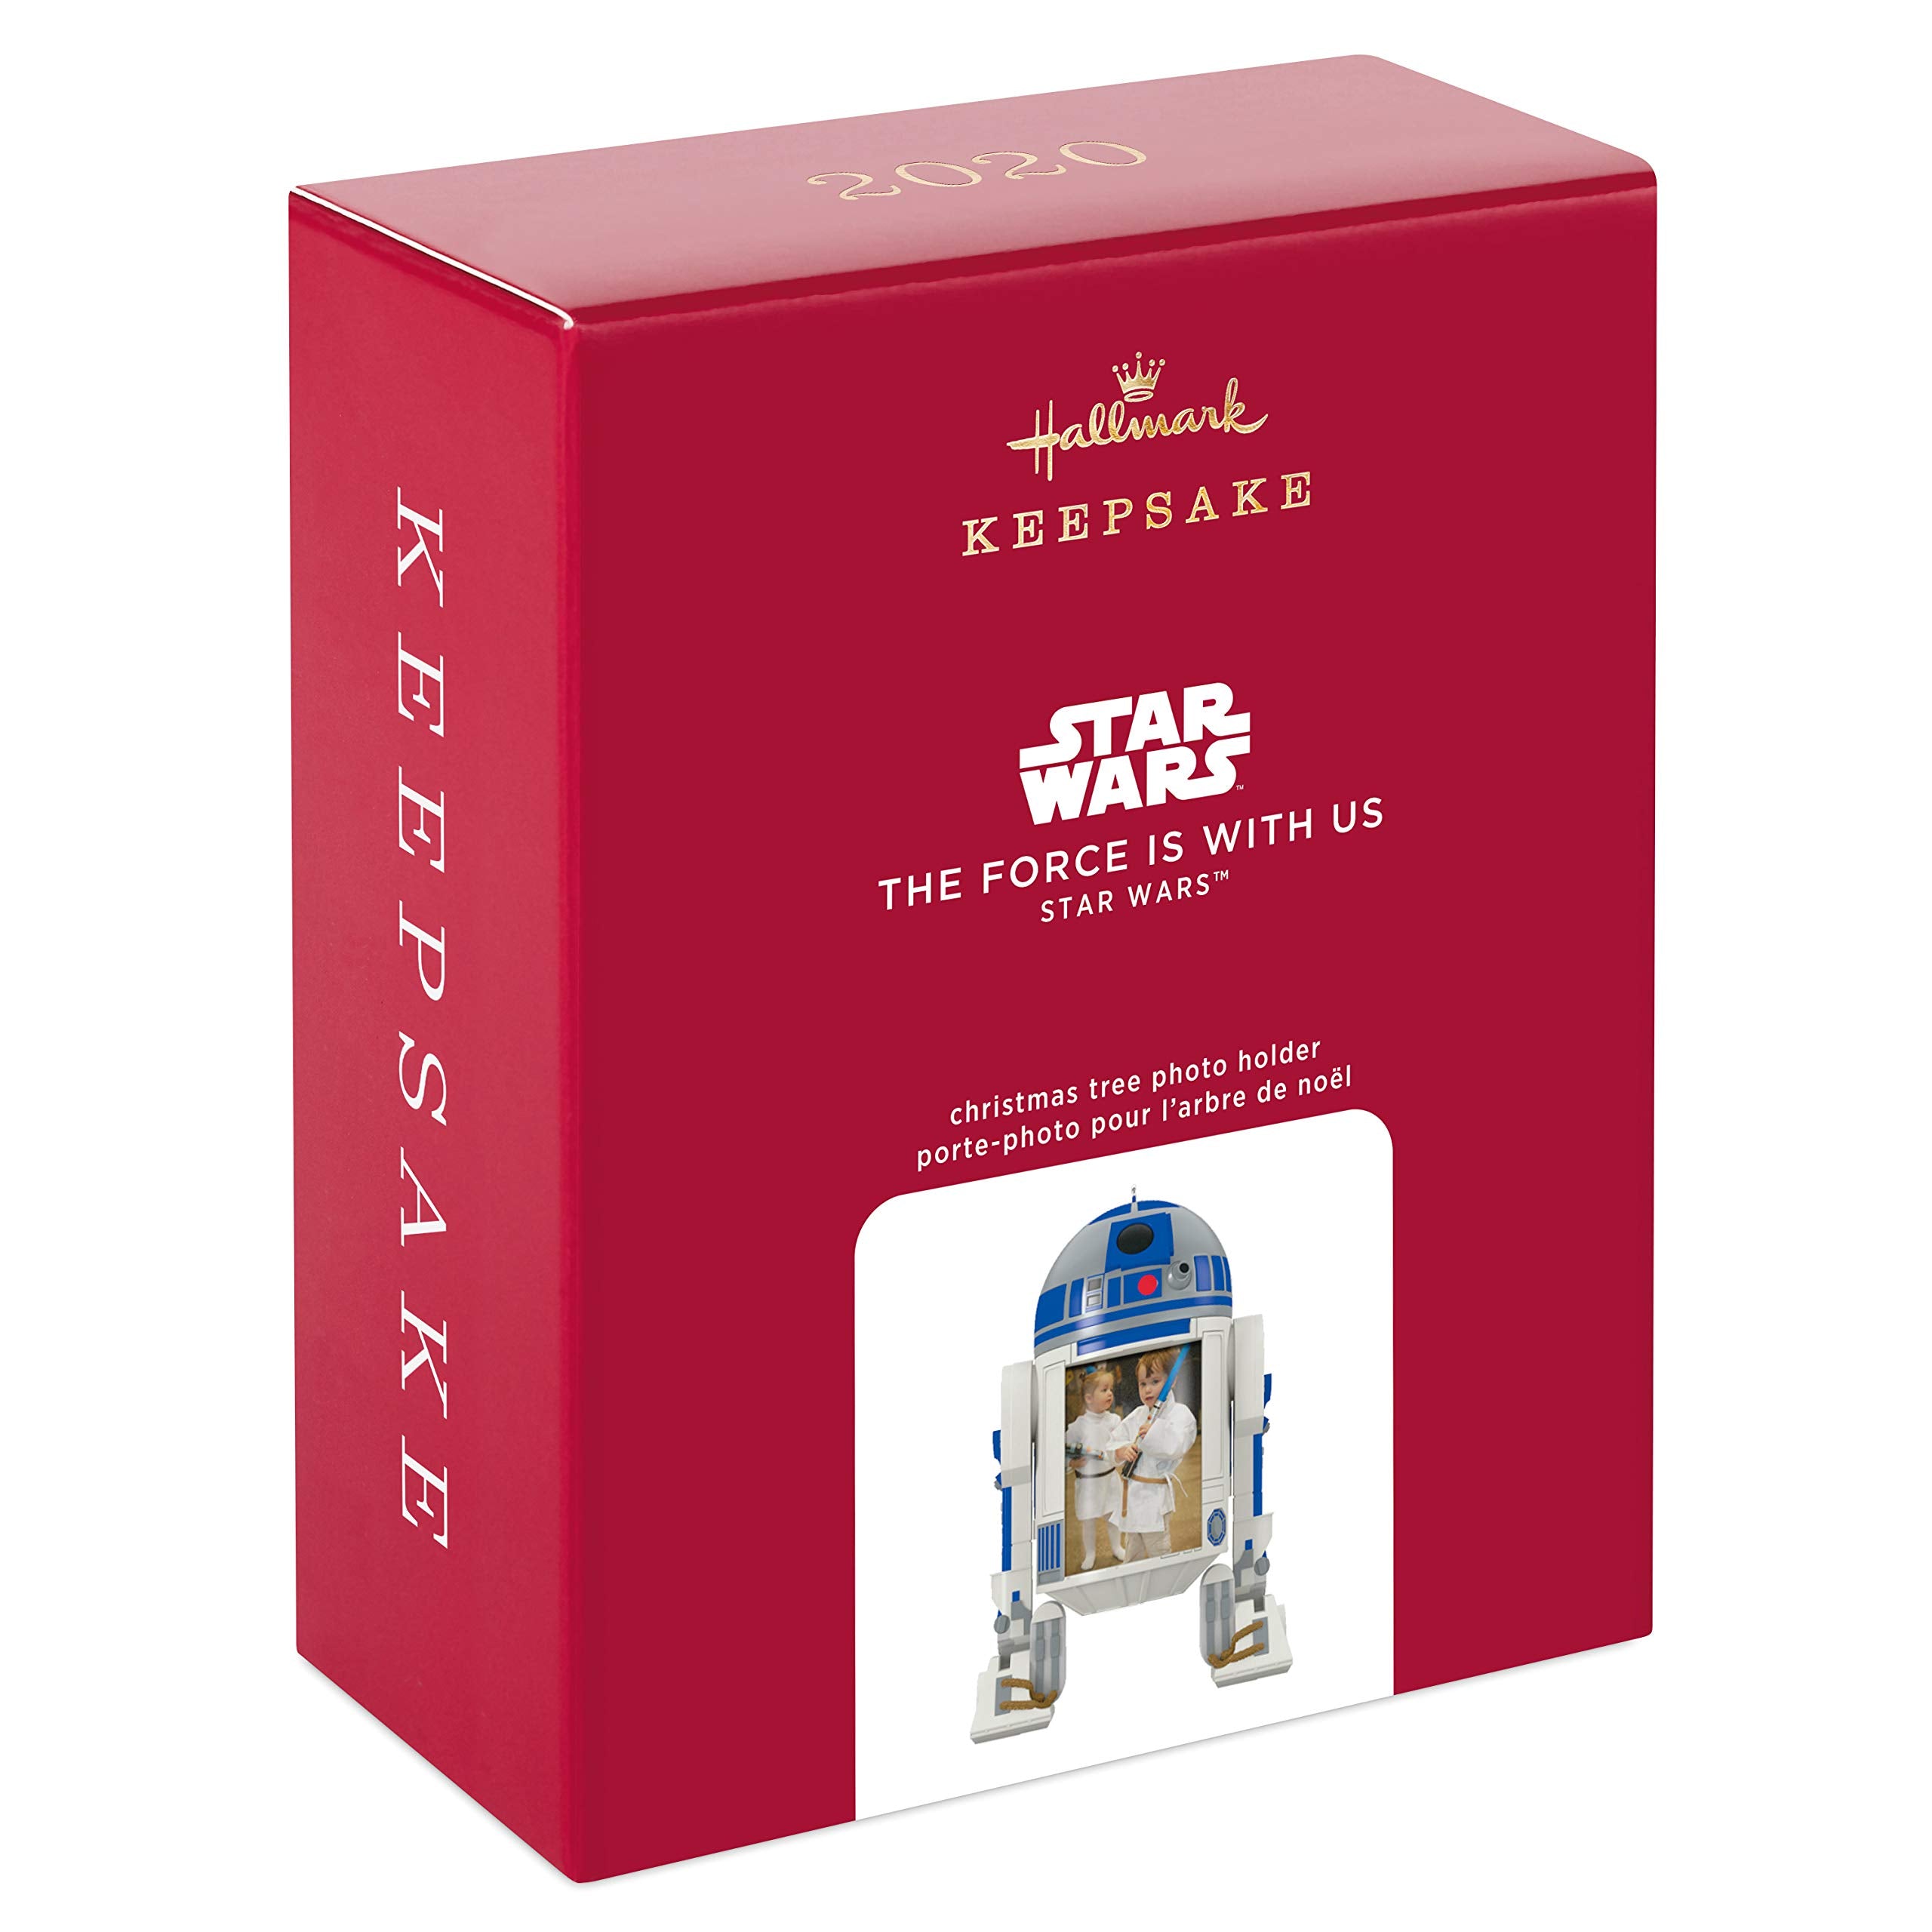 Hallmark Keepsake Christmas Ornament 2020, Star Wars R2-D2 The Force Is With Us Photo Frame (1799QXI6011)